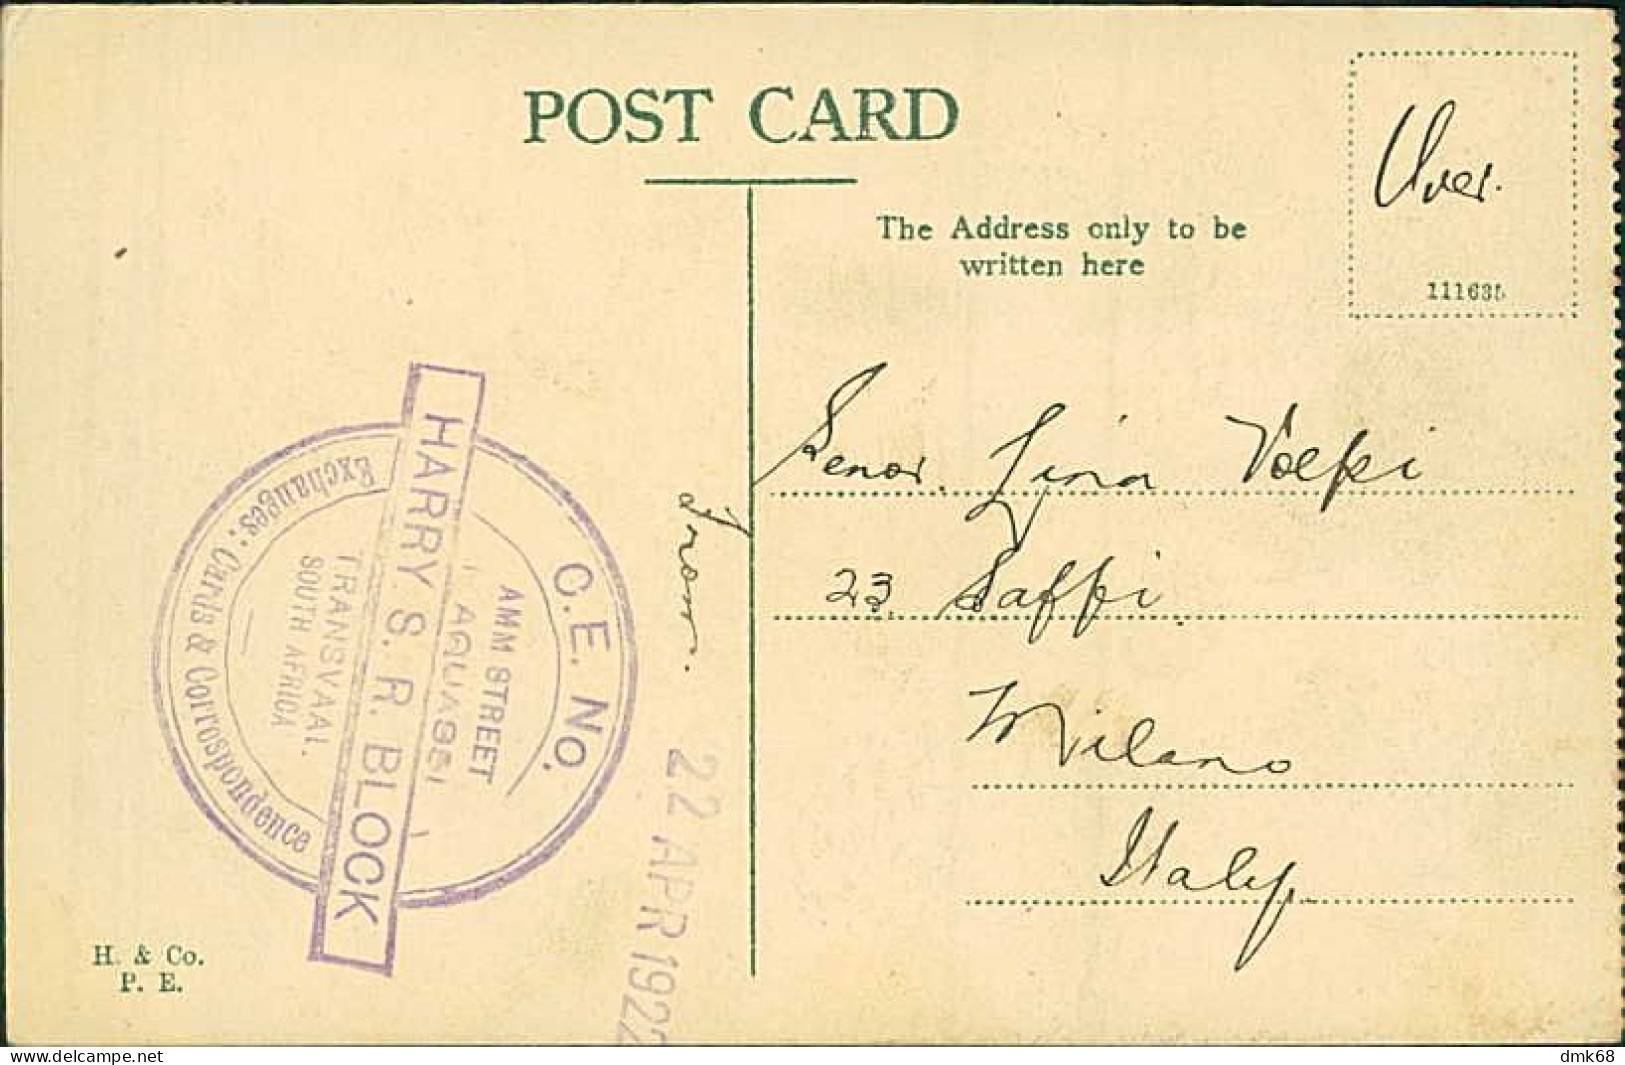 SOUTH AFRICA - PRETORIA - CHURCH SQUARE - EDIT. H.&CO. P.E. - MAILED TO ITALY 1922 / STAMPS (12582) - Afrique Du Sud